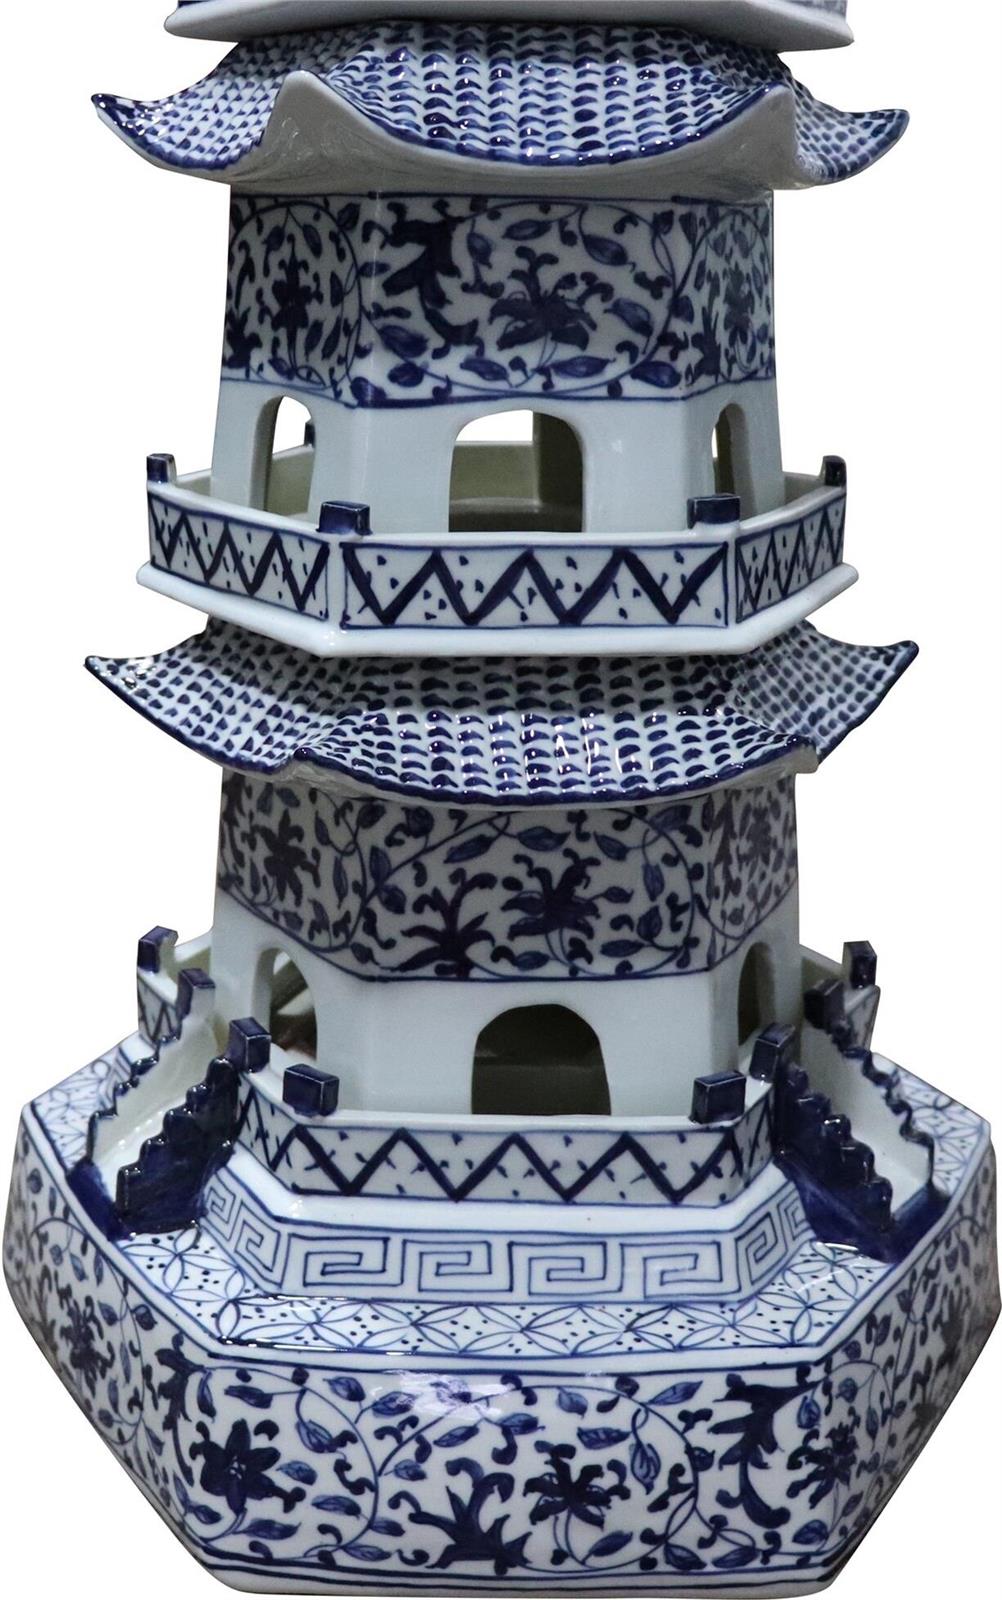 Pagoda Sculpture Twisted Vine Abstract 7-Tier Blue White Ceramic Handmade-Image 4